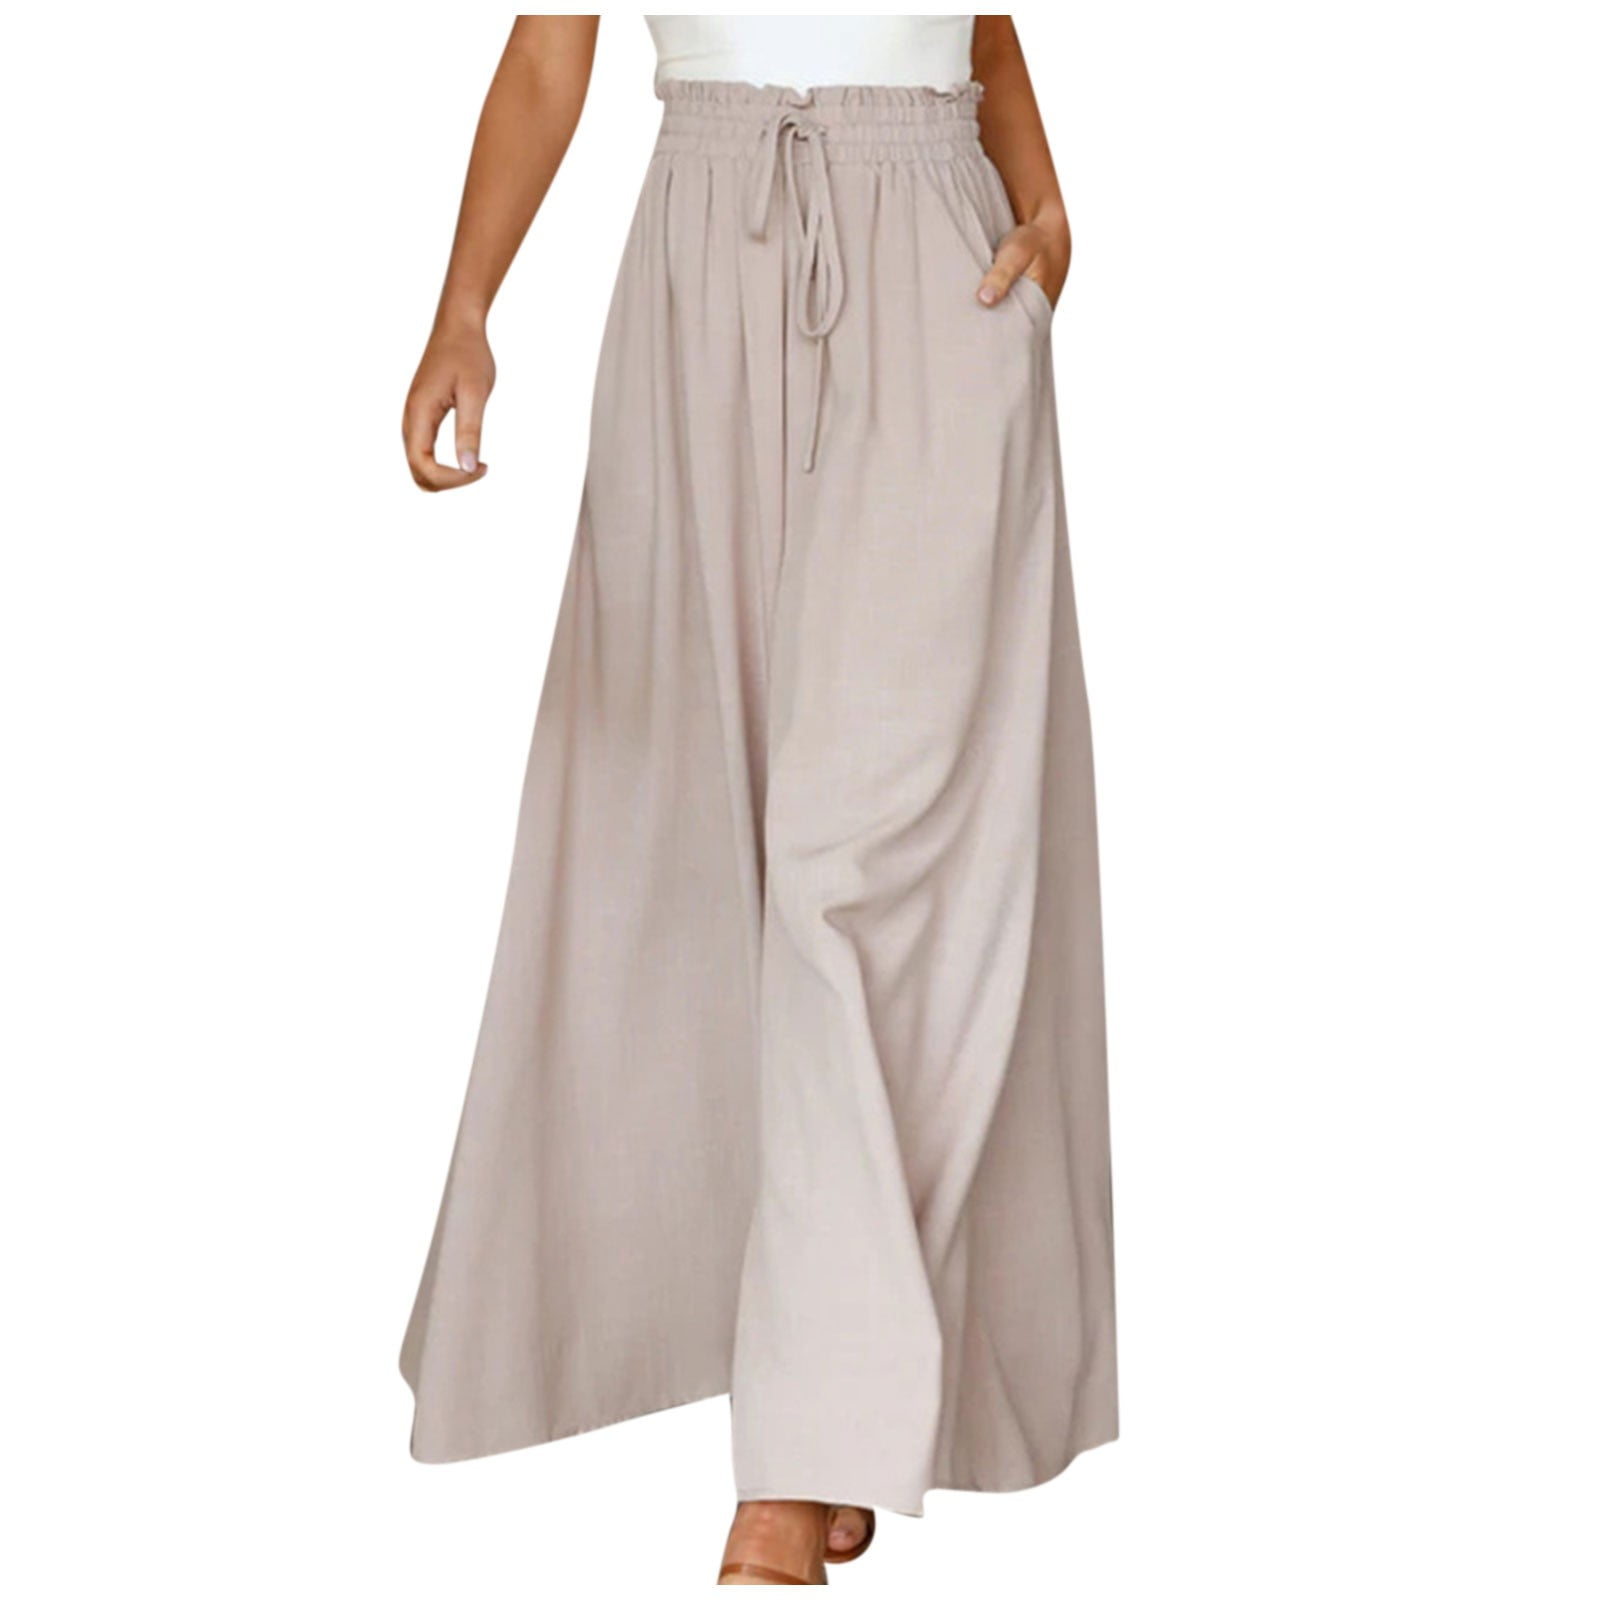 RPVATI Petite Palazzo Pants for Women Petite Length Loose Fit Elastic Plus  Size Dress Pants Clearance High Waisted Flowy Pockets Wide Leg Pants Women  Pleated Drawstring Fall Casual Pants Beige S 